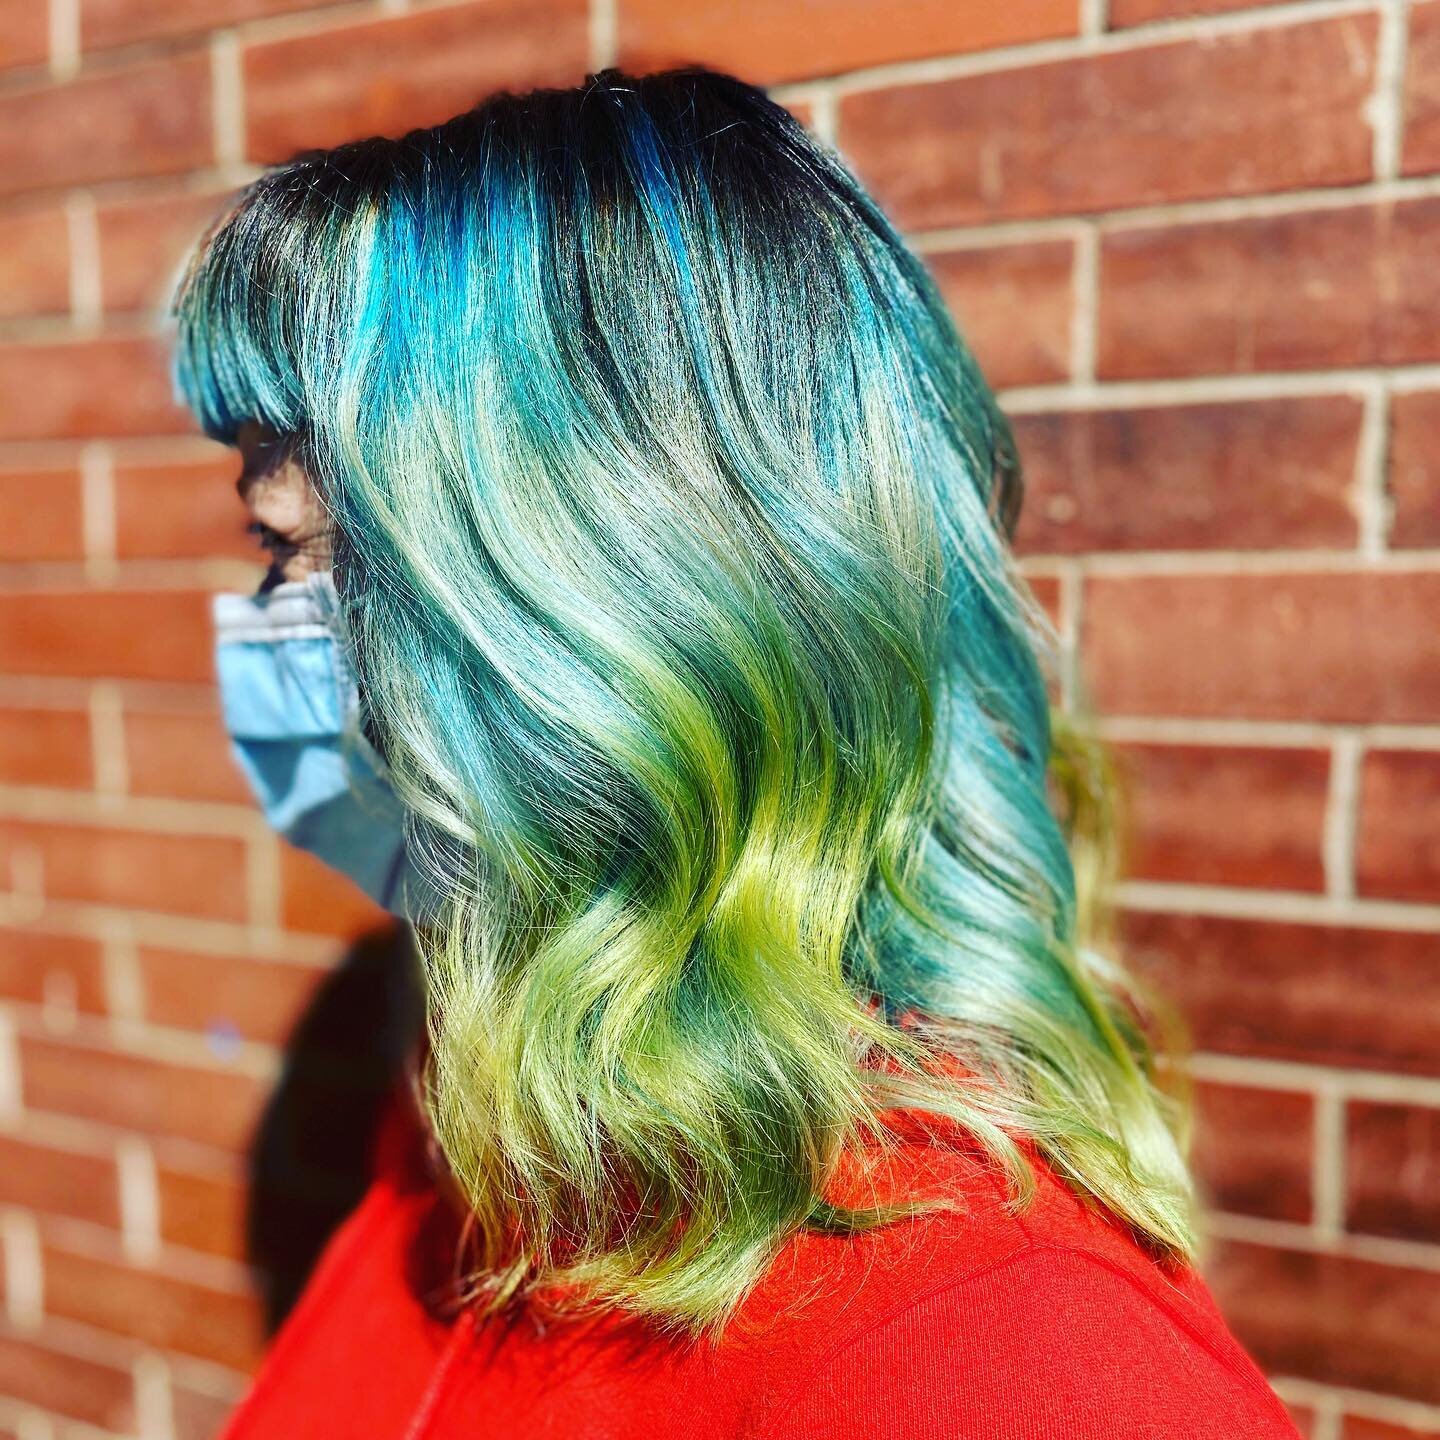 A sunny, reflective color melt that we 💙💚💛🤍 #bookdiana #luckylushairparlourforall